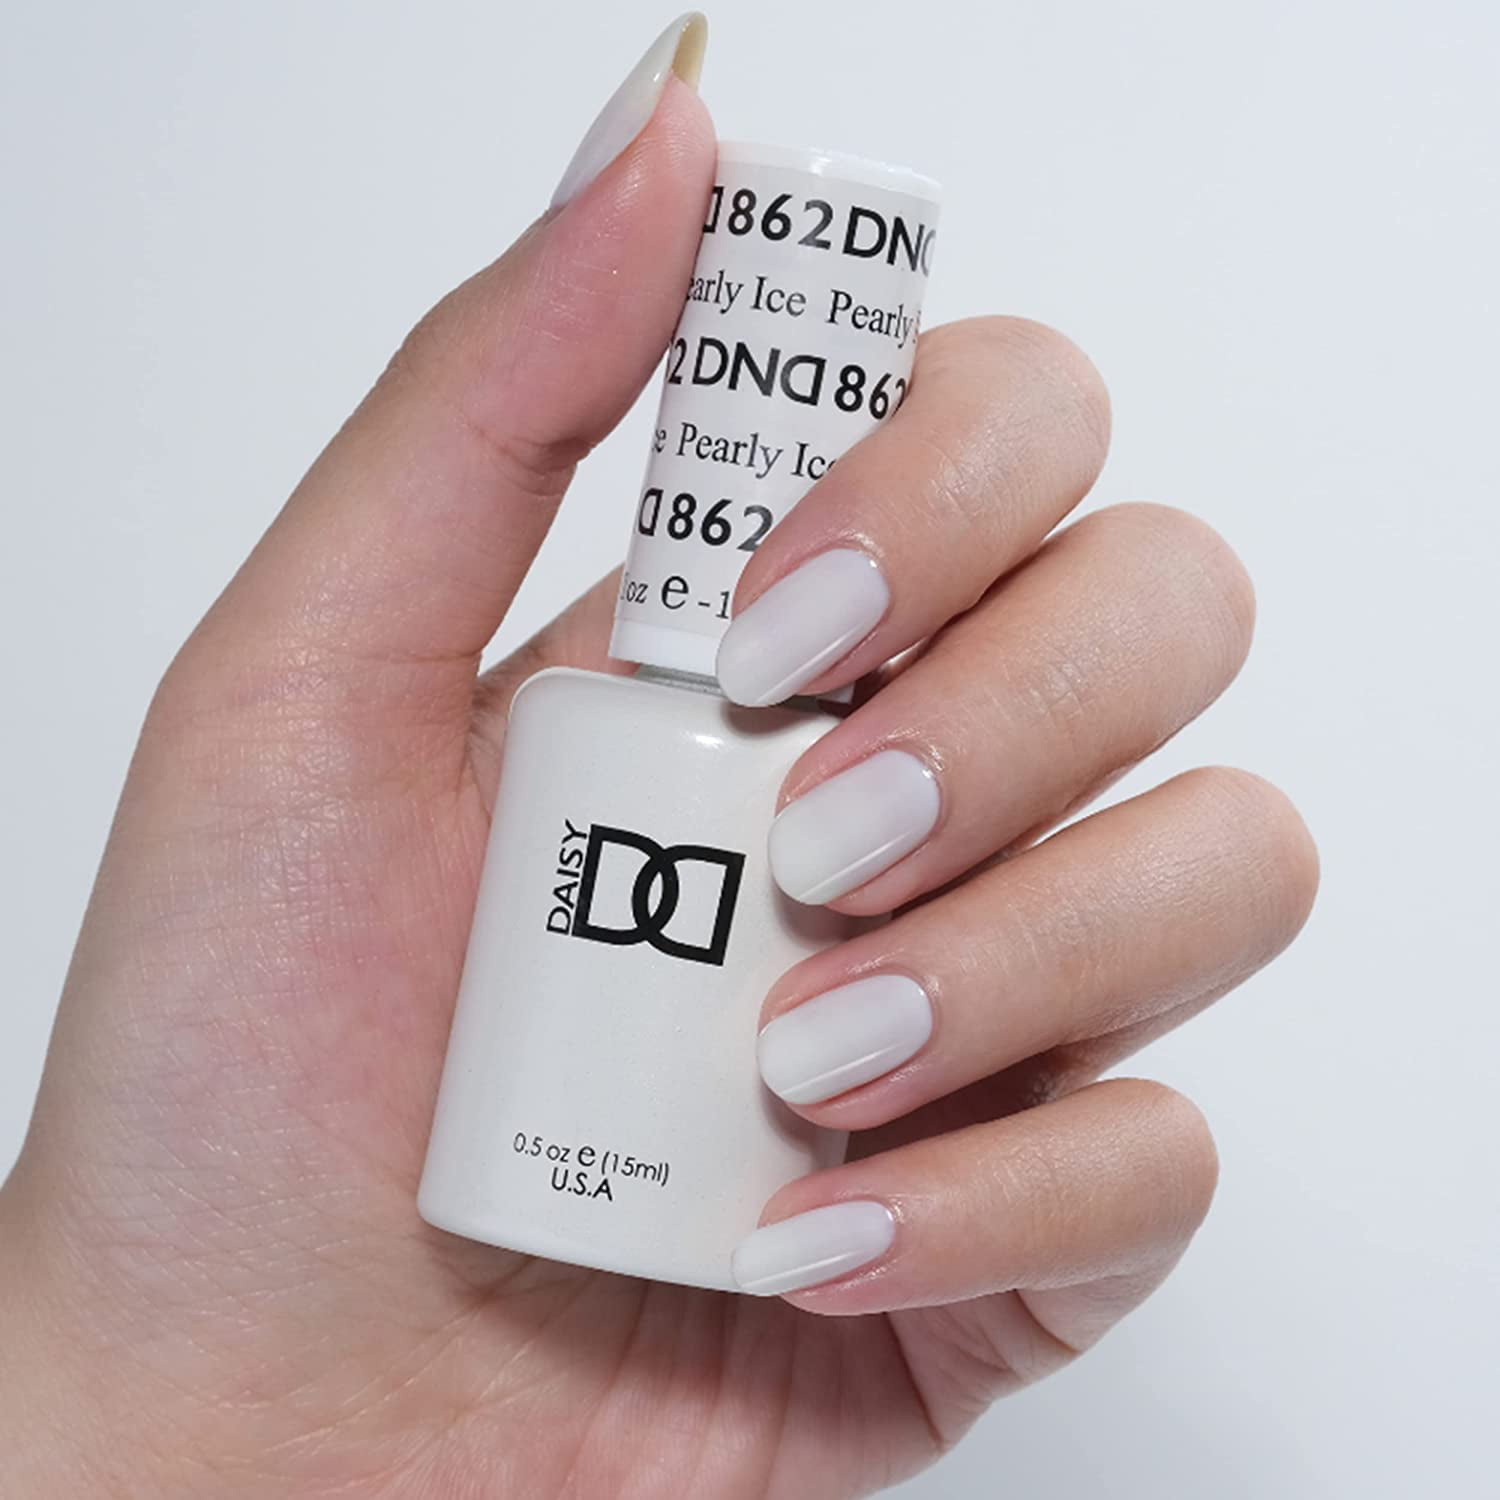 DND Daisy Gel Duo - Tie The Knot #861 by Universal Nail Supplies